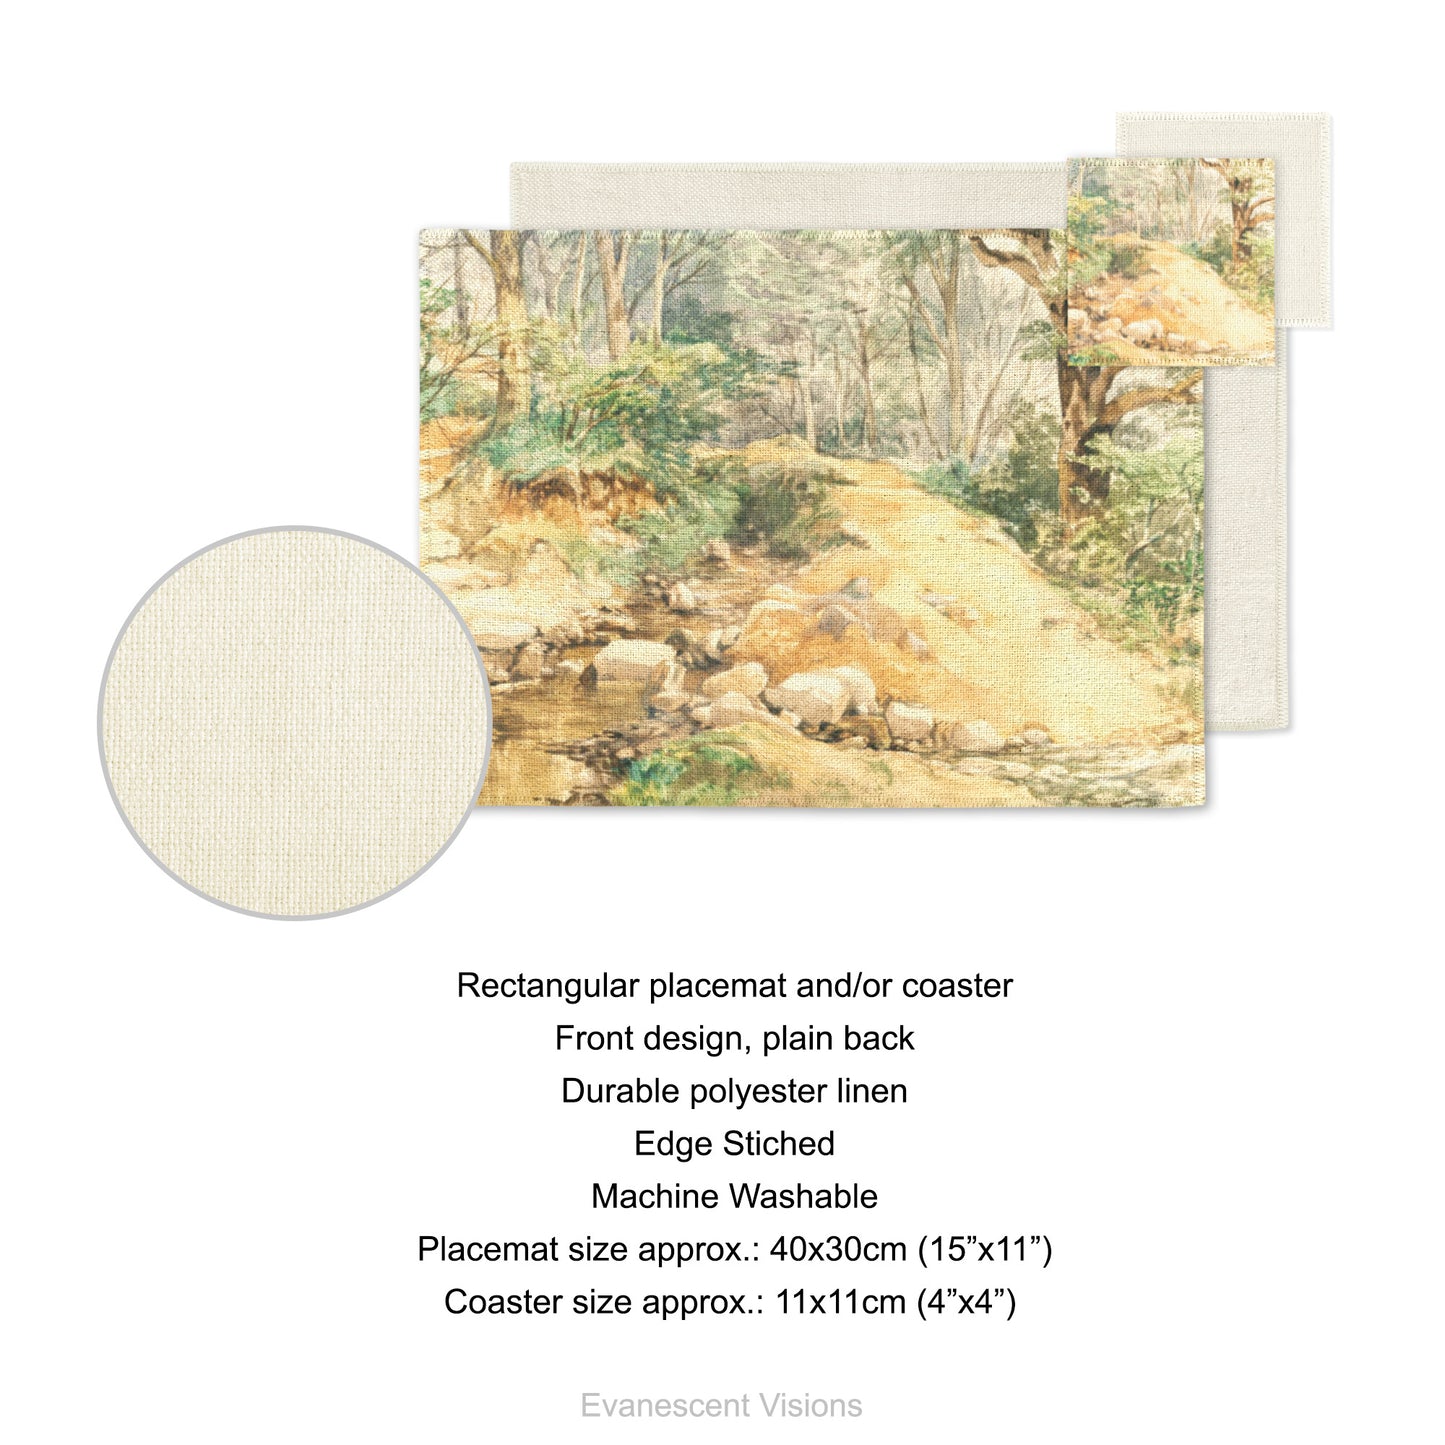 Product details for placemat and coaster. Front design, plain back, durable polyester linen, edge sticked, machine washable. Placemat size approx 40x30cm (15"x11"). Coaster size approx 11x11cm (4"x4")